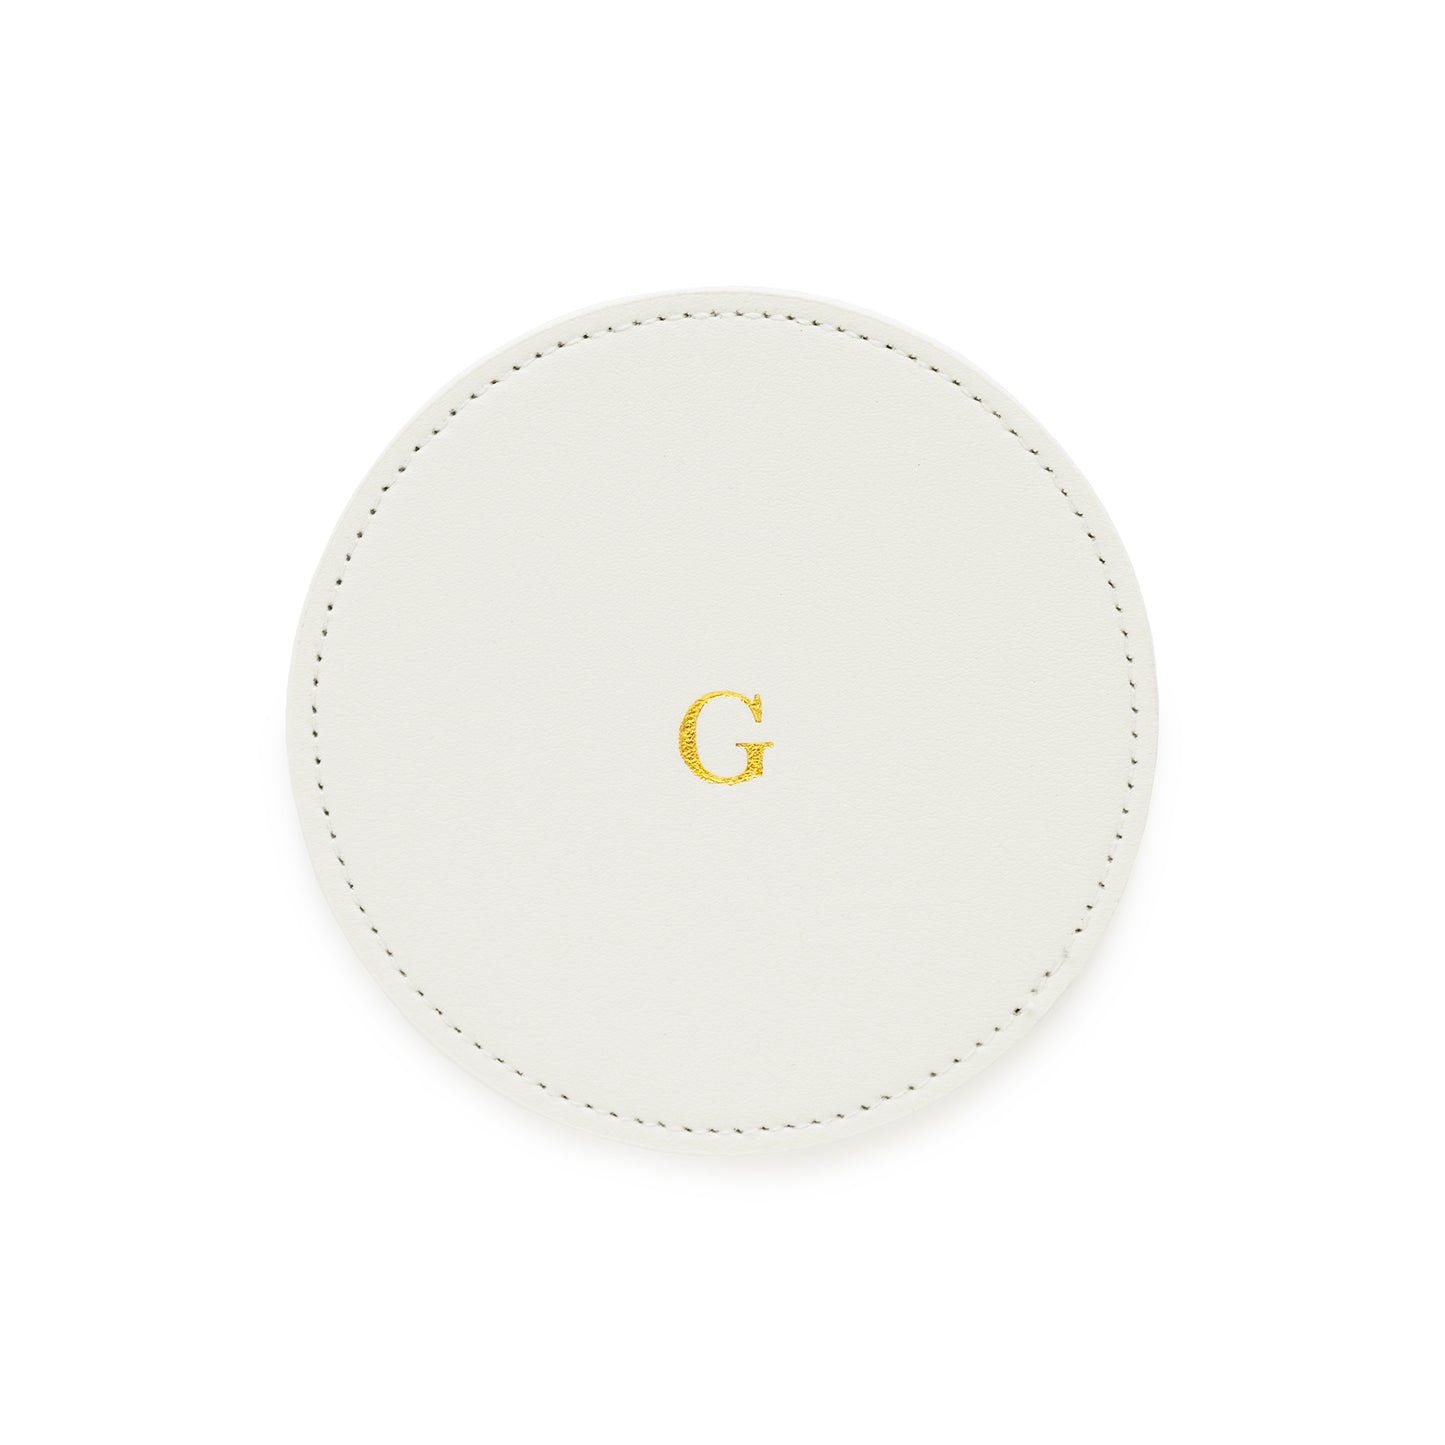 white monogrammed coaster with gold foil g on it